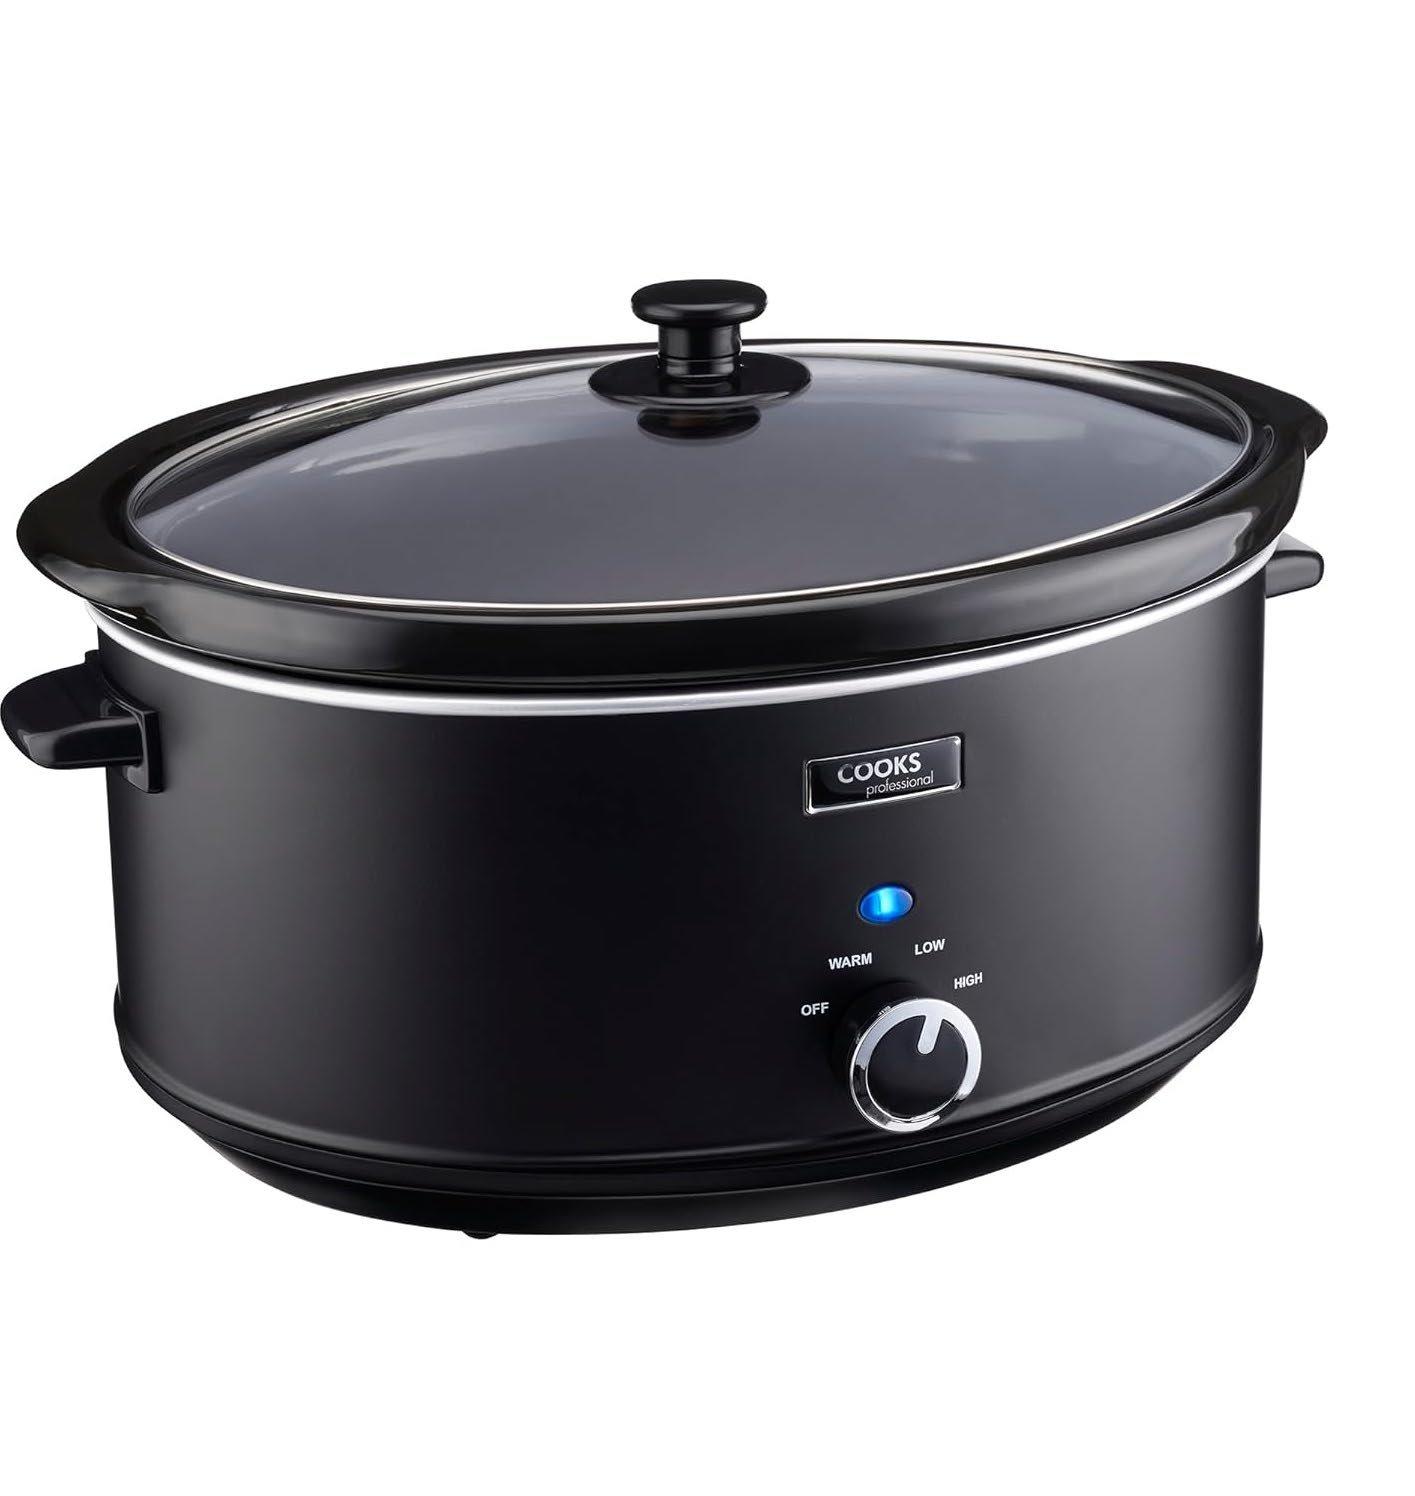 Black Stainless Steel Slow Cooker Removable Ceramic Pot Bowl Keep Warm 8L